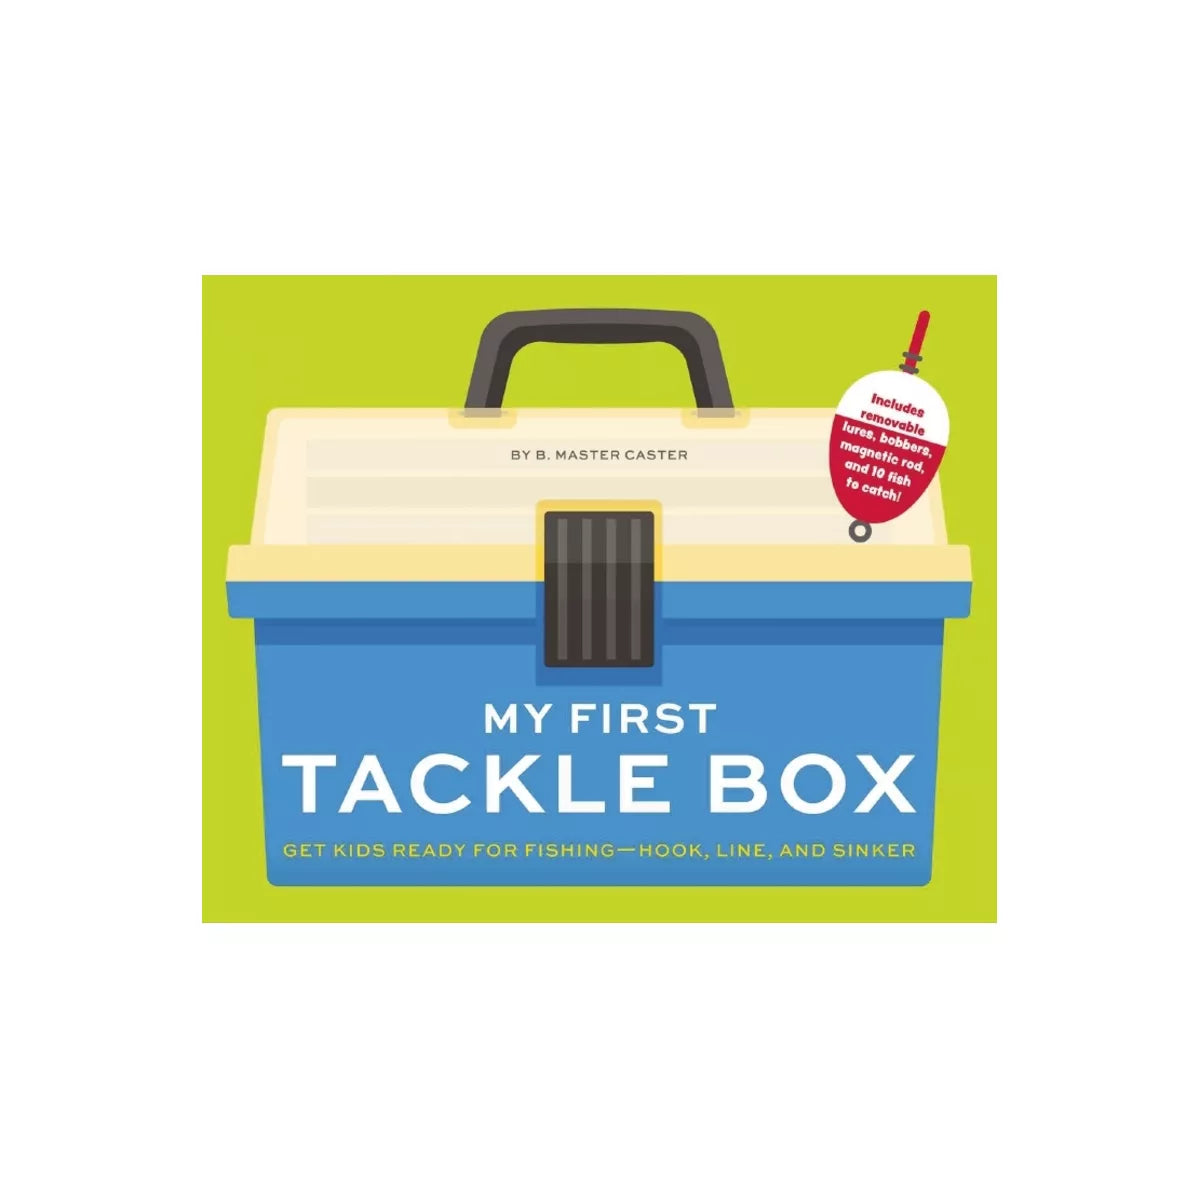 My First Tackle Box Book